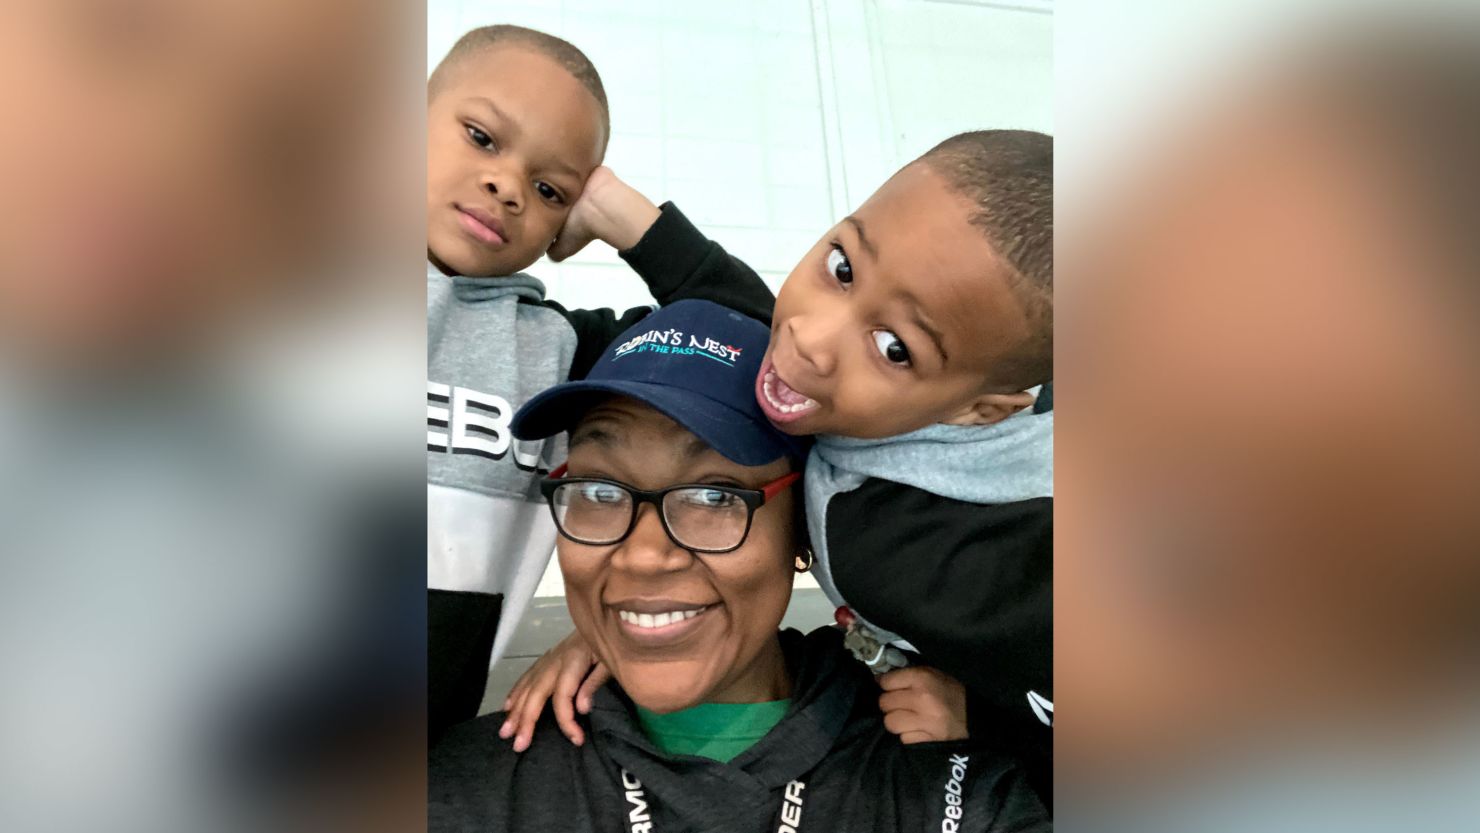 Kimberly Cooley hugged her 6-year-old nephews before the pandemic -- but not anymore.